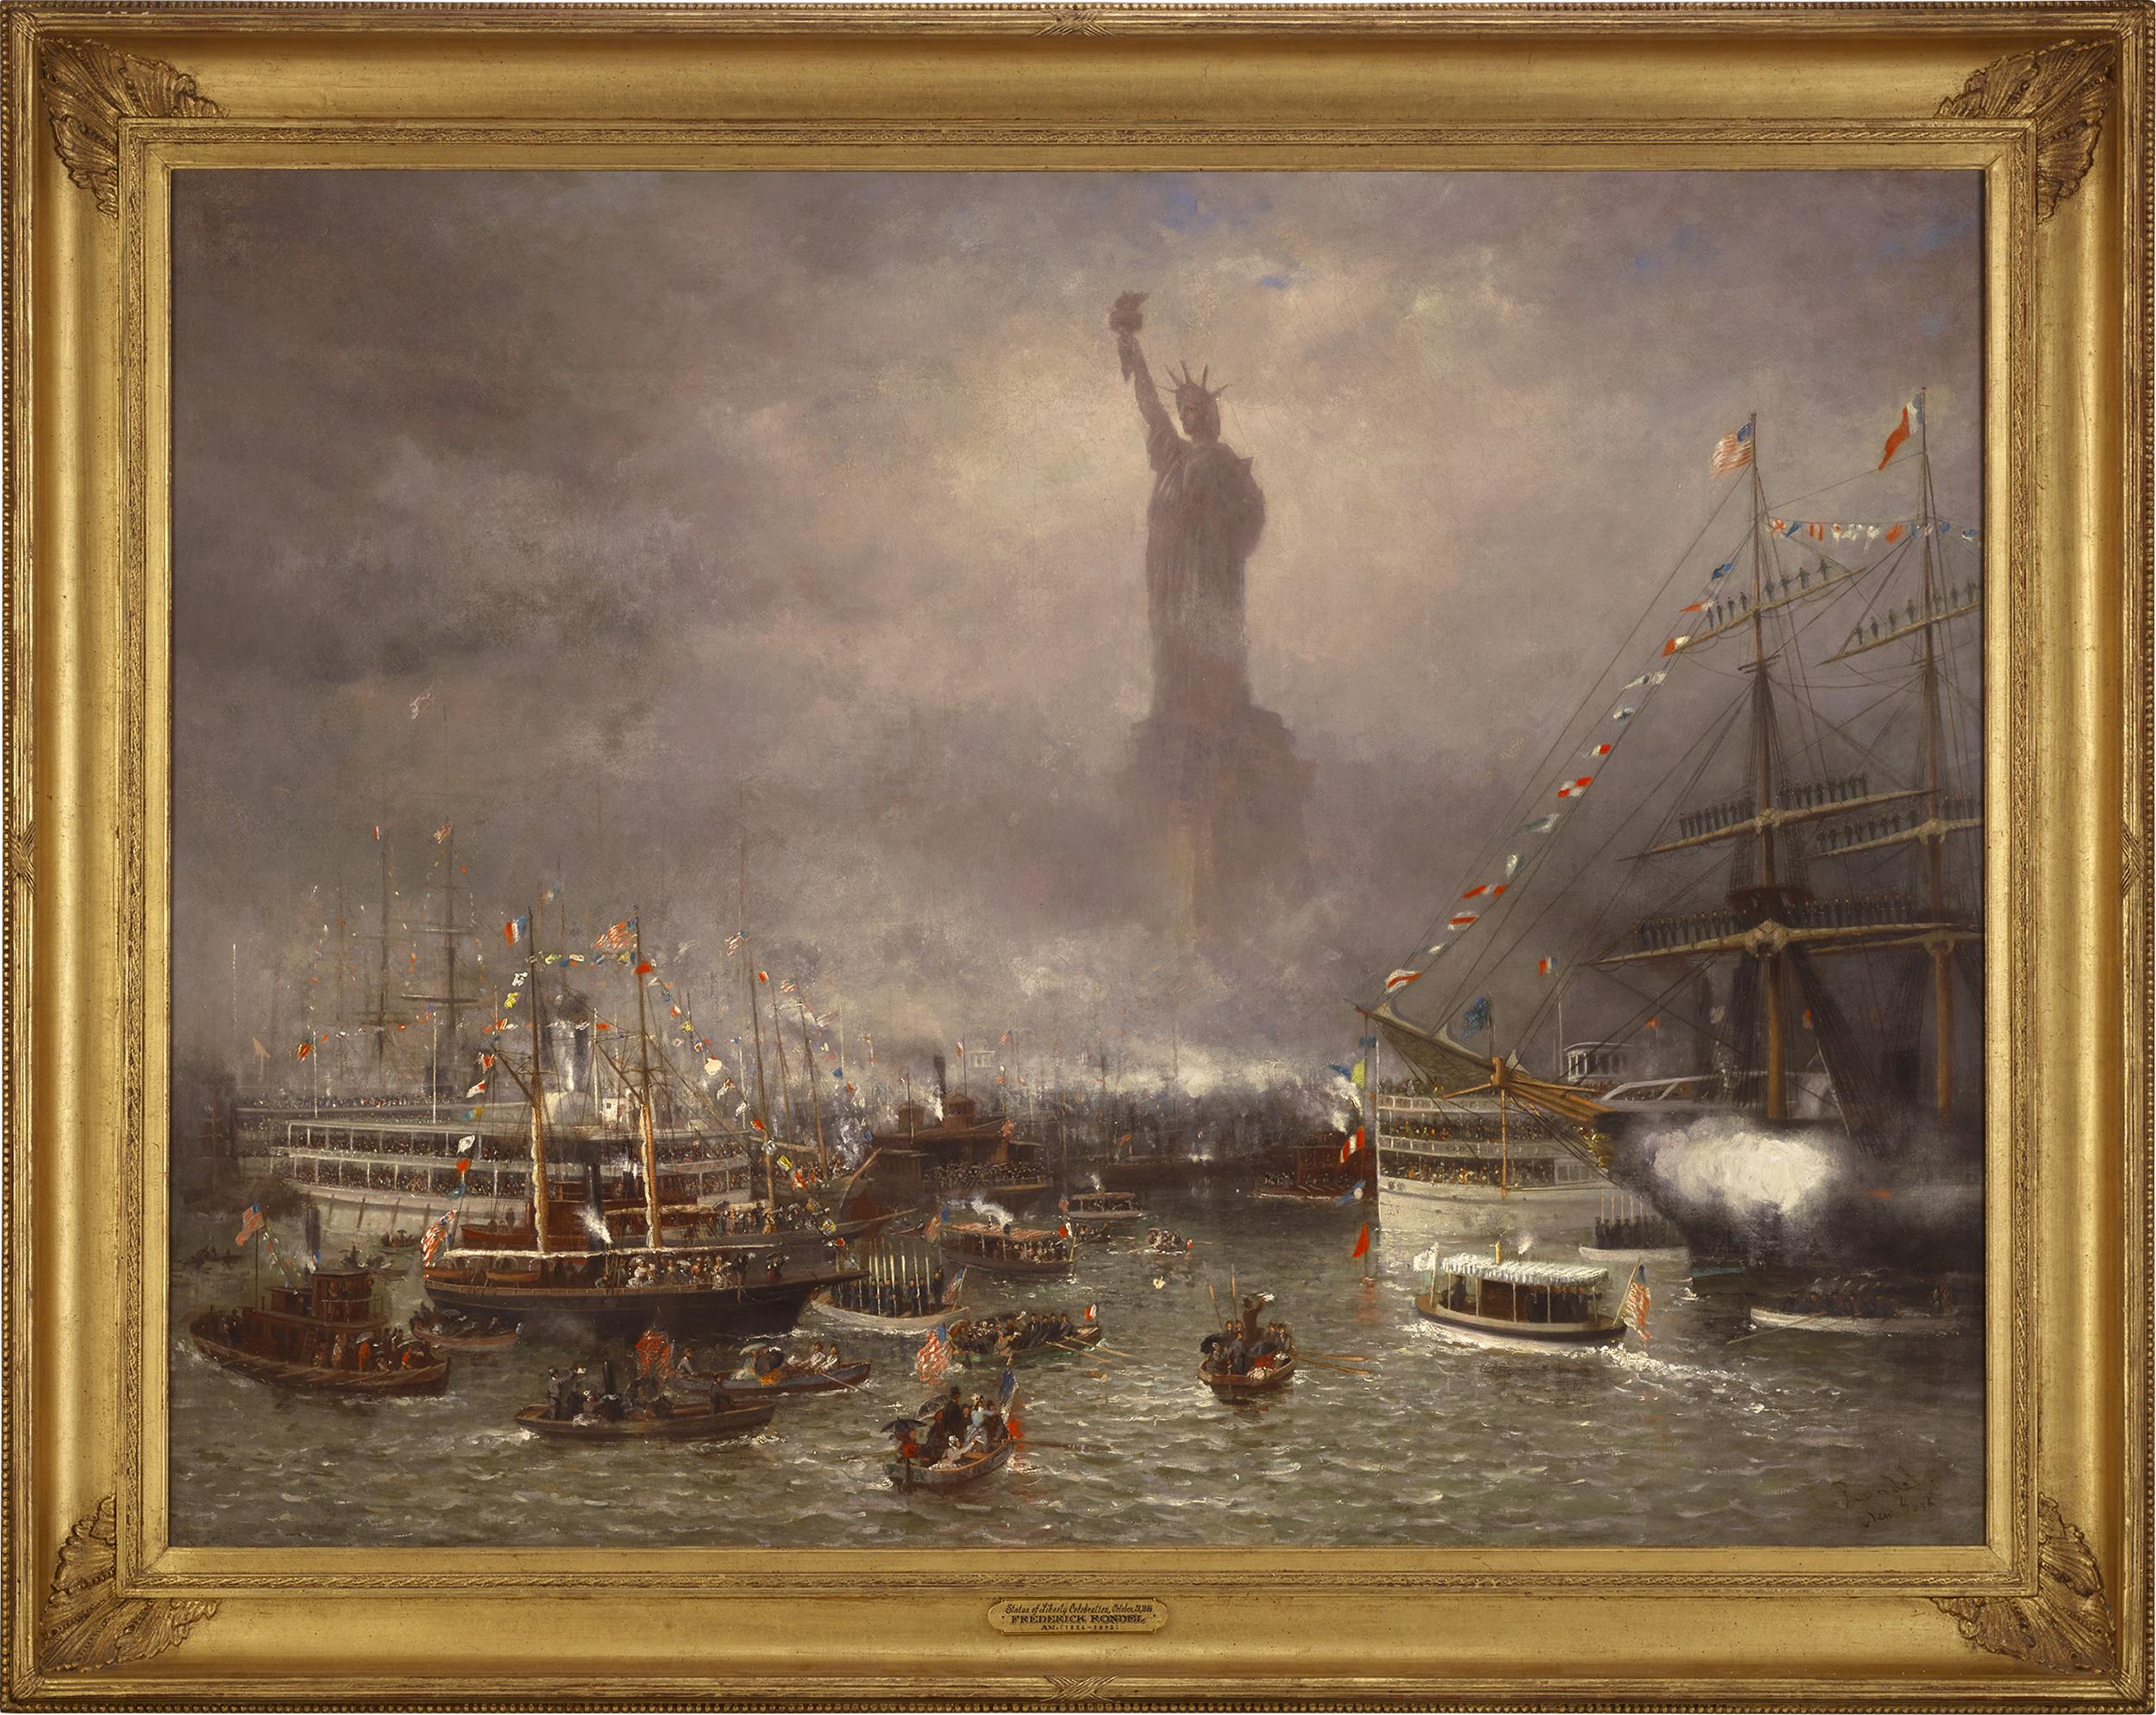 Statue Of Liberty Celebration, October 28, 1886 By Frederic Rondel - Painting by Frederick Rondel